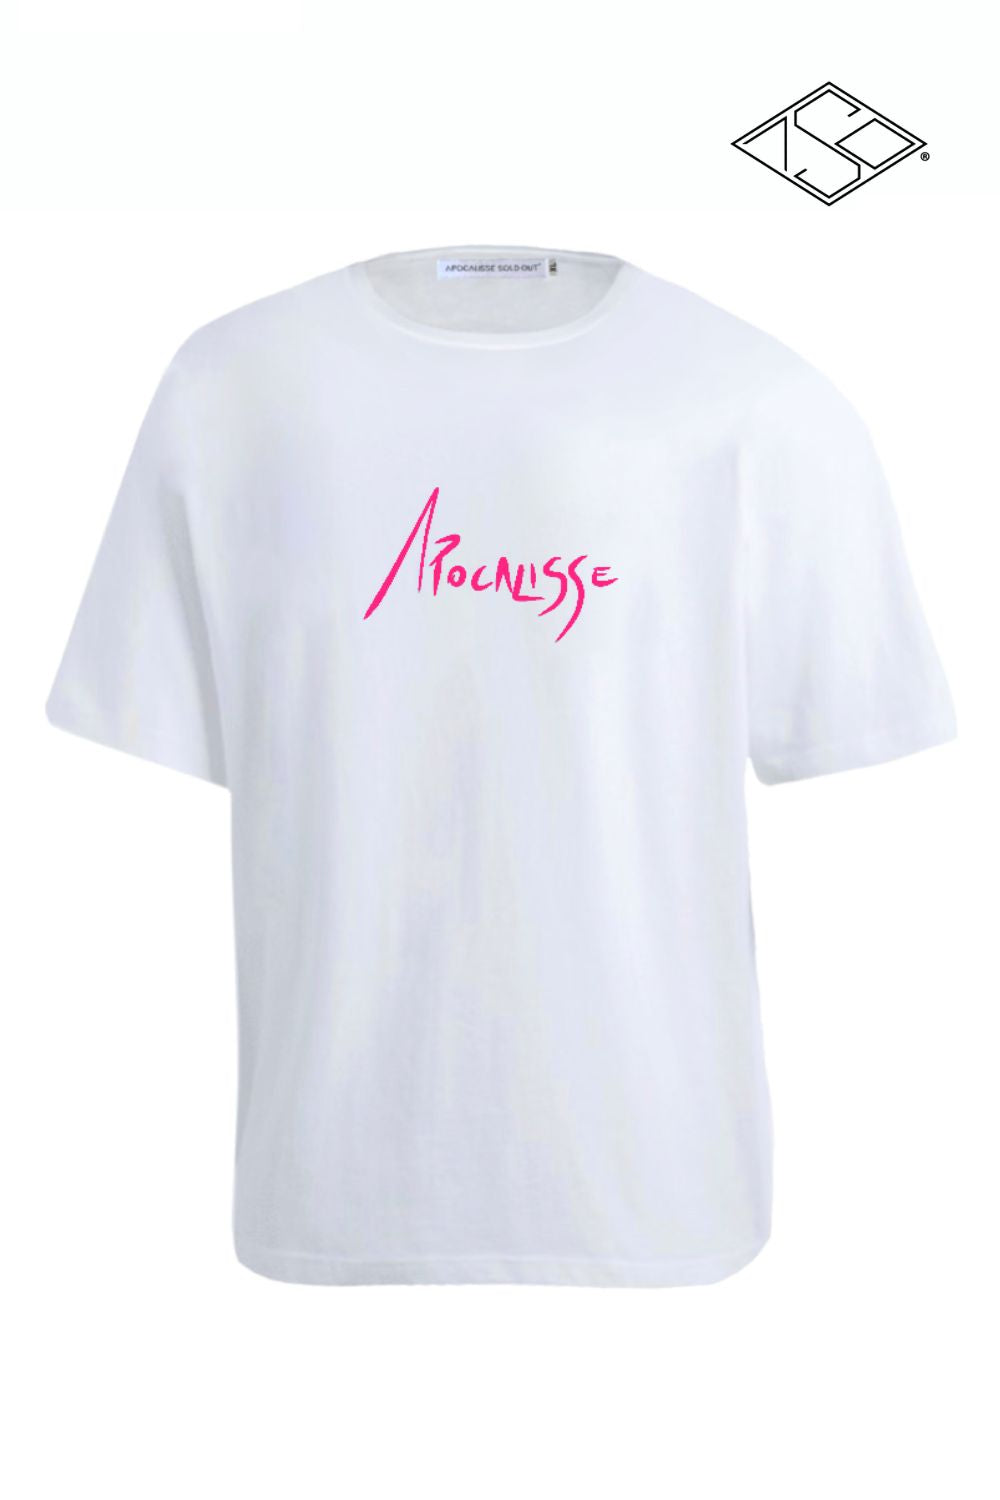 Apocalisse Basic edition pink print white tshirt by ApocalisseSoldOut® Fashion Brand